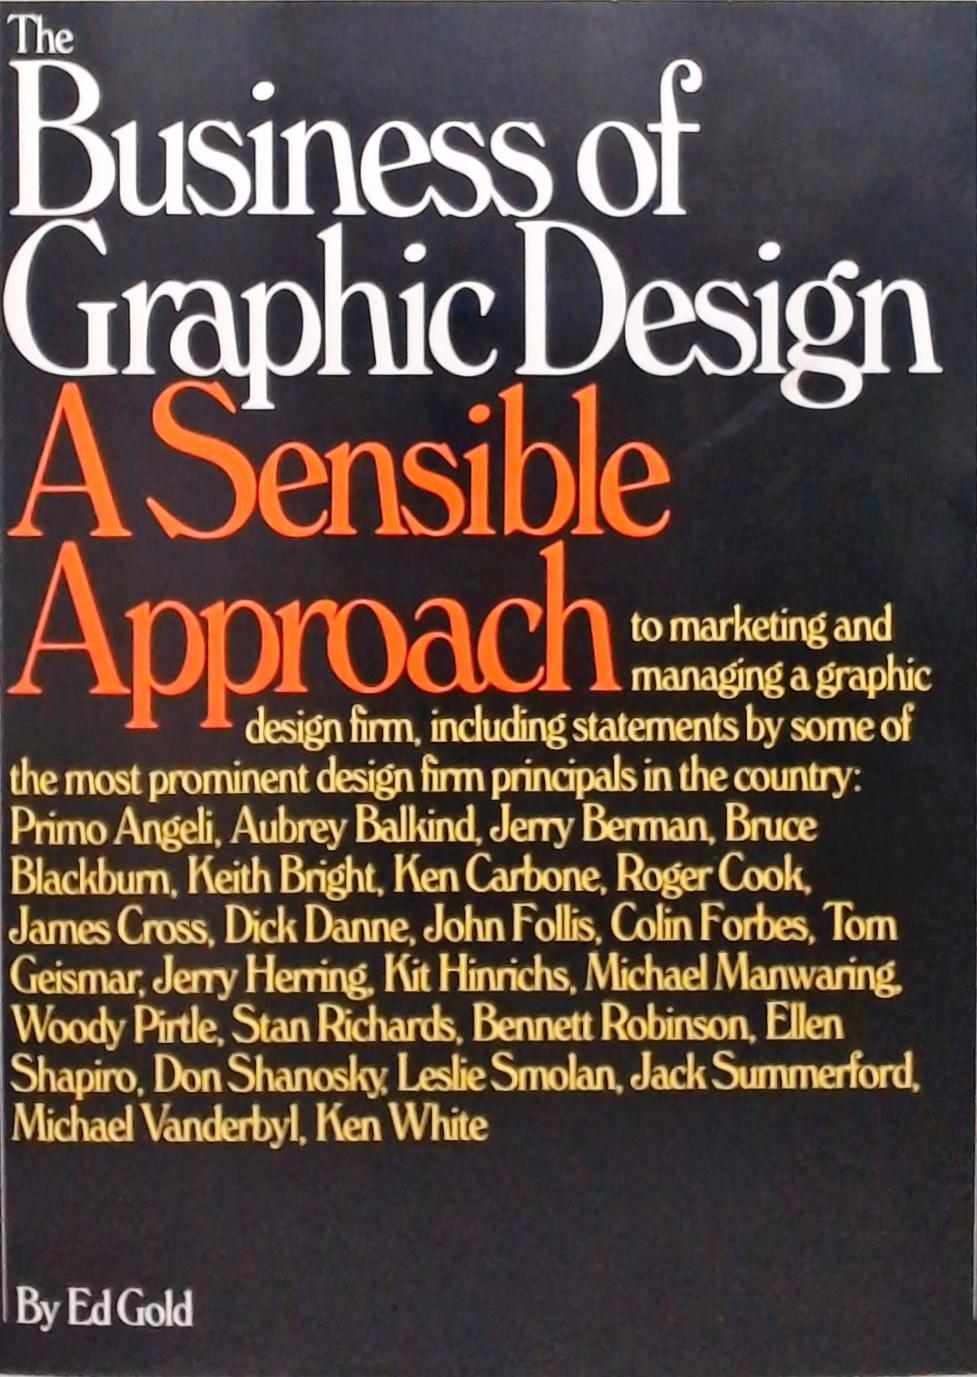 The Business of Graphic Design